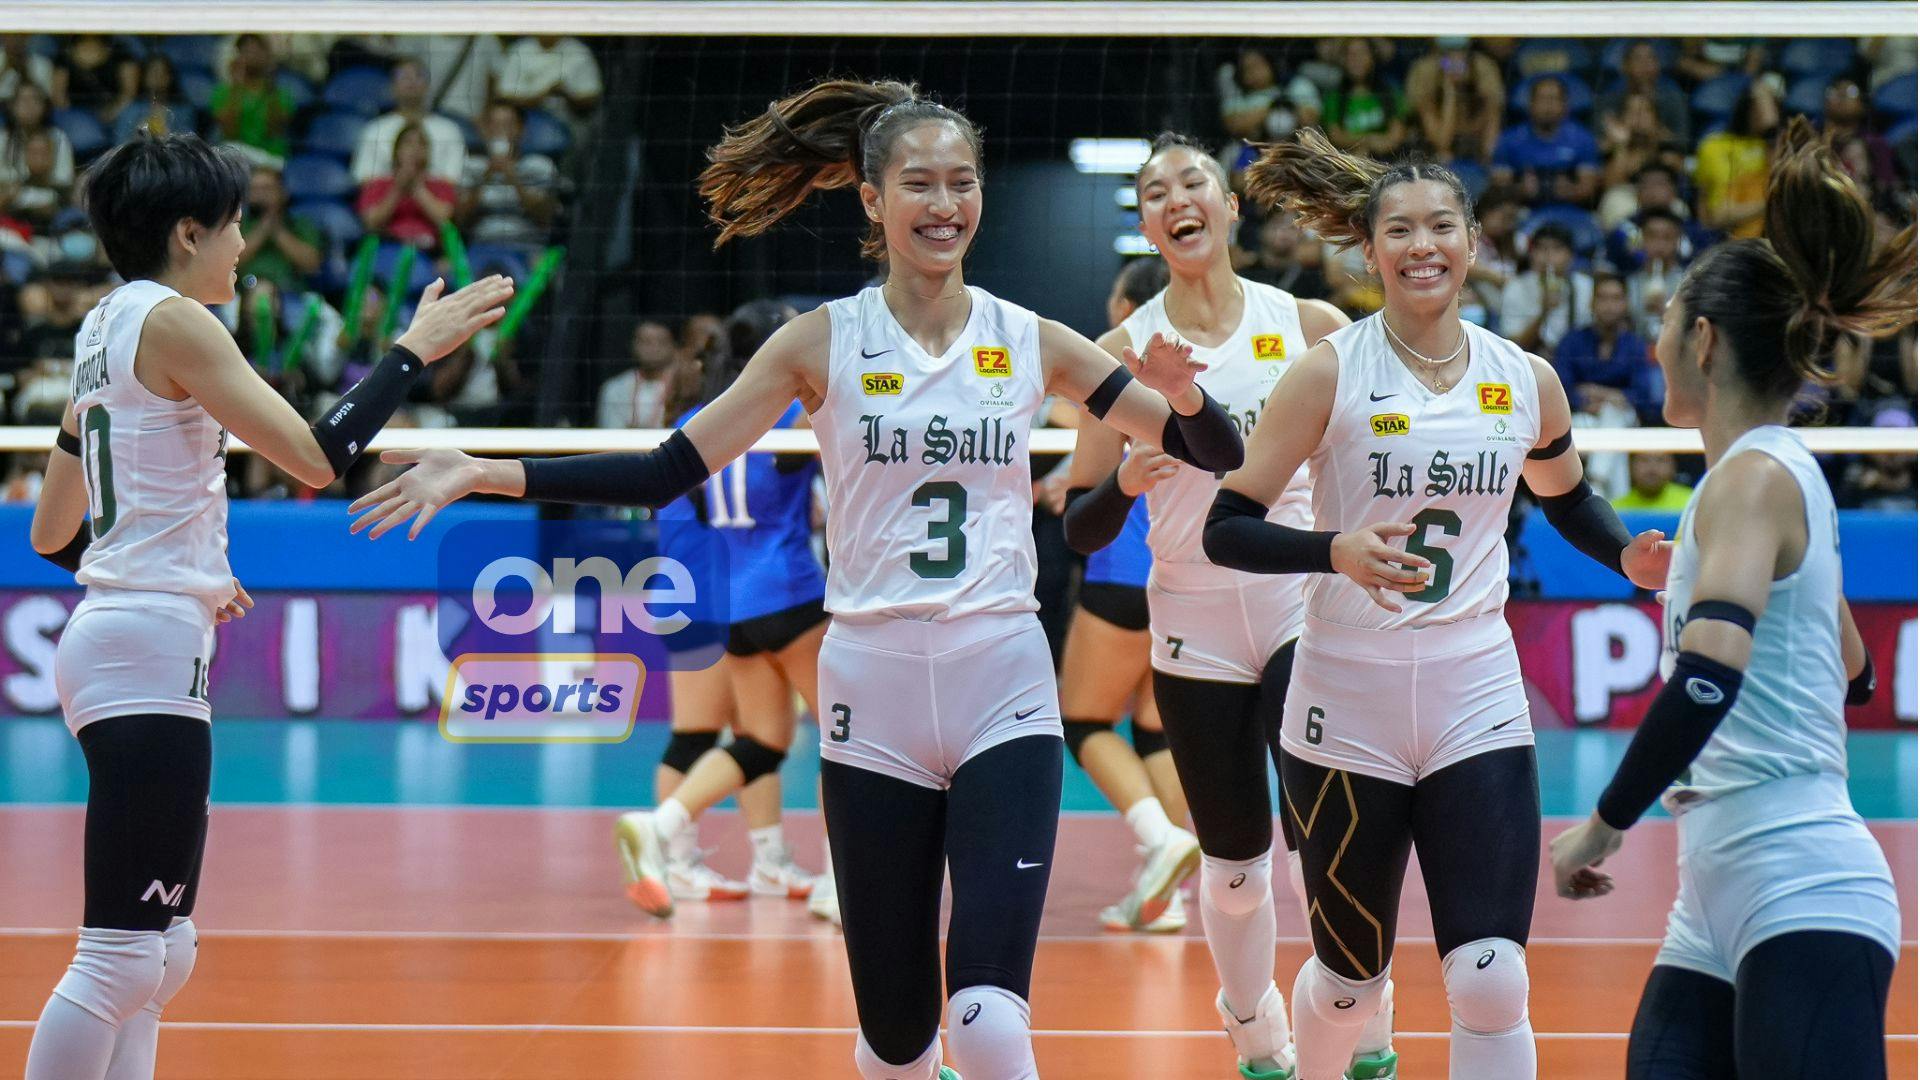 UAAP: Thea Gagate, La Salle extend winning streak over Ateneo to 14 games after clean sweep